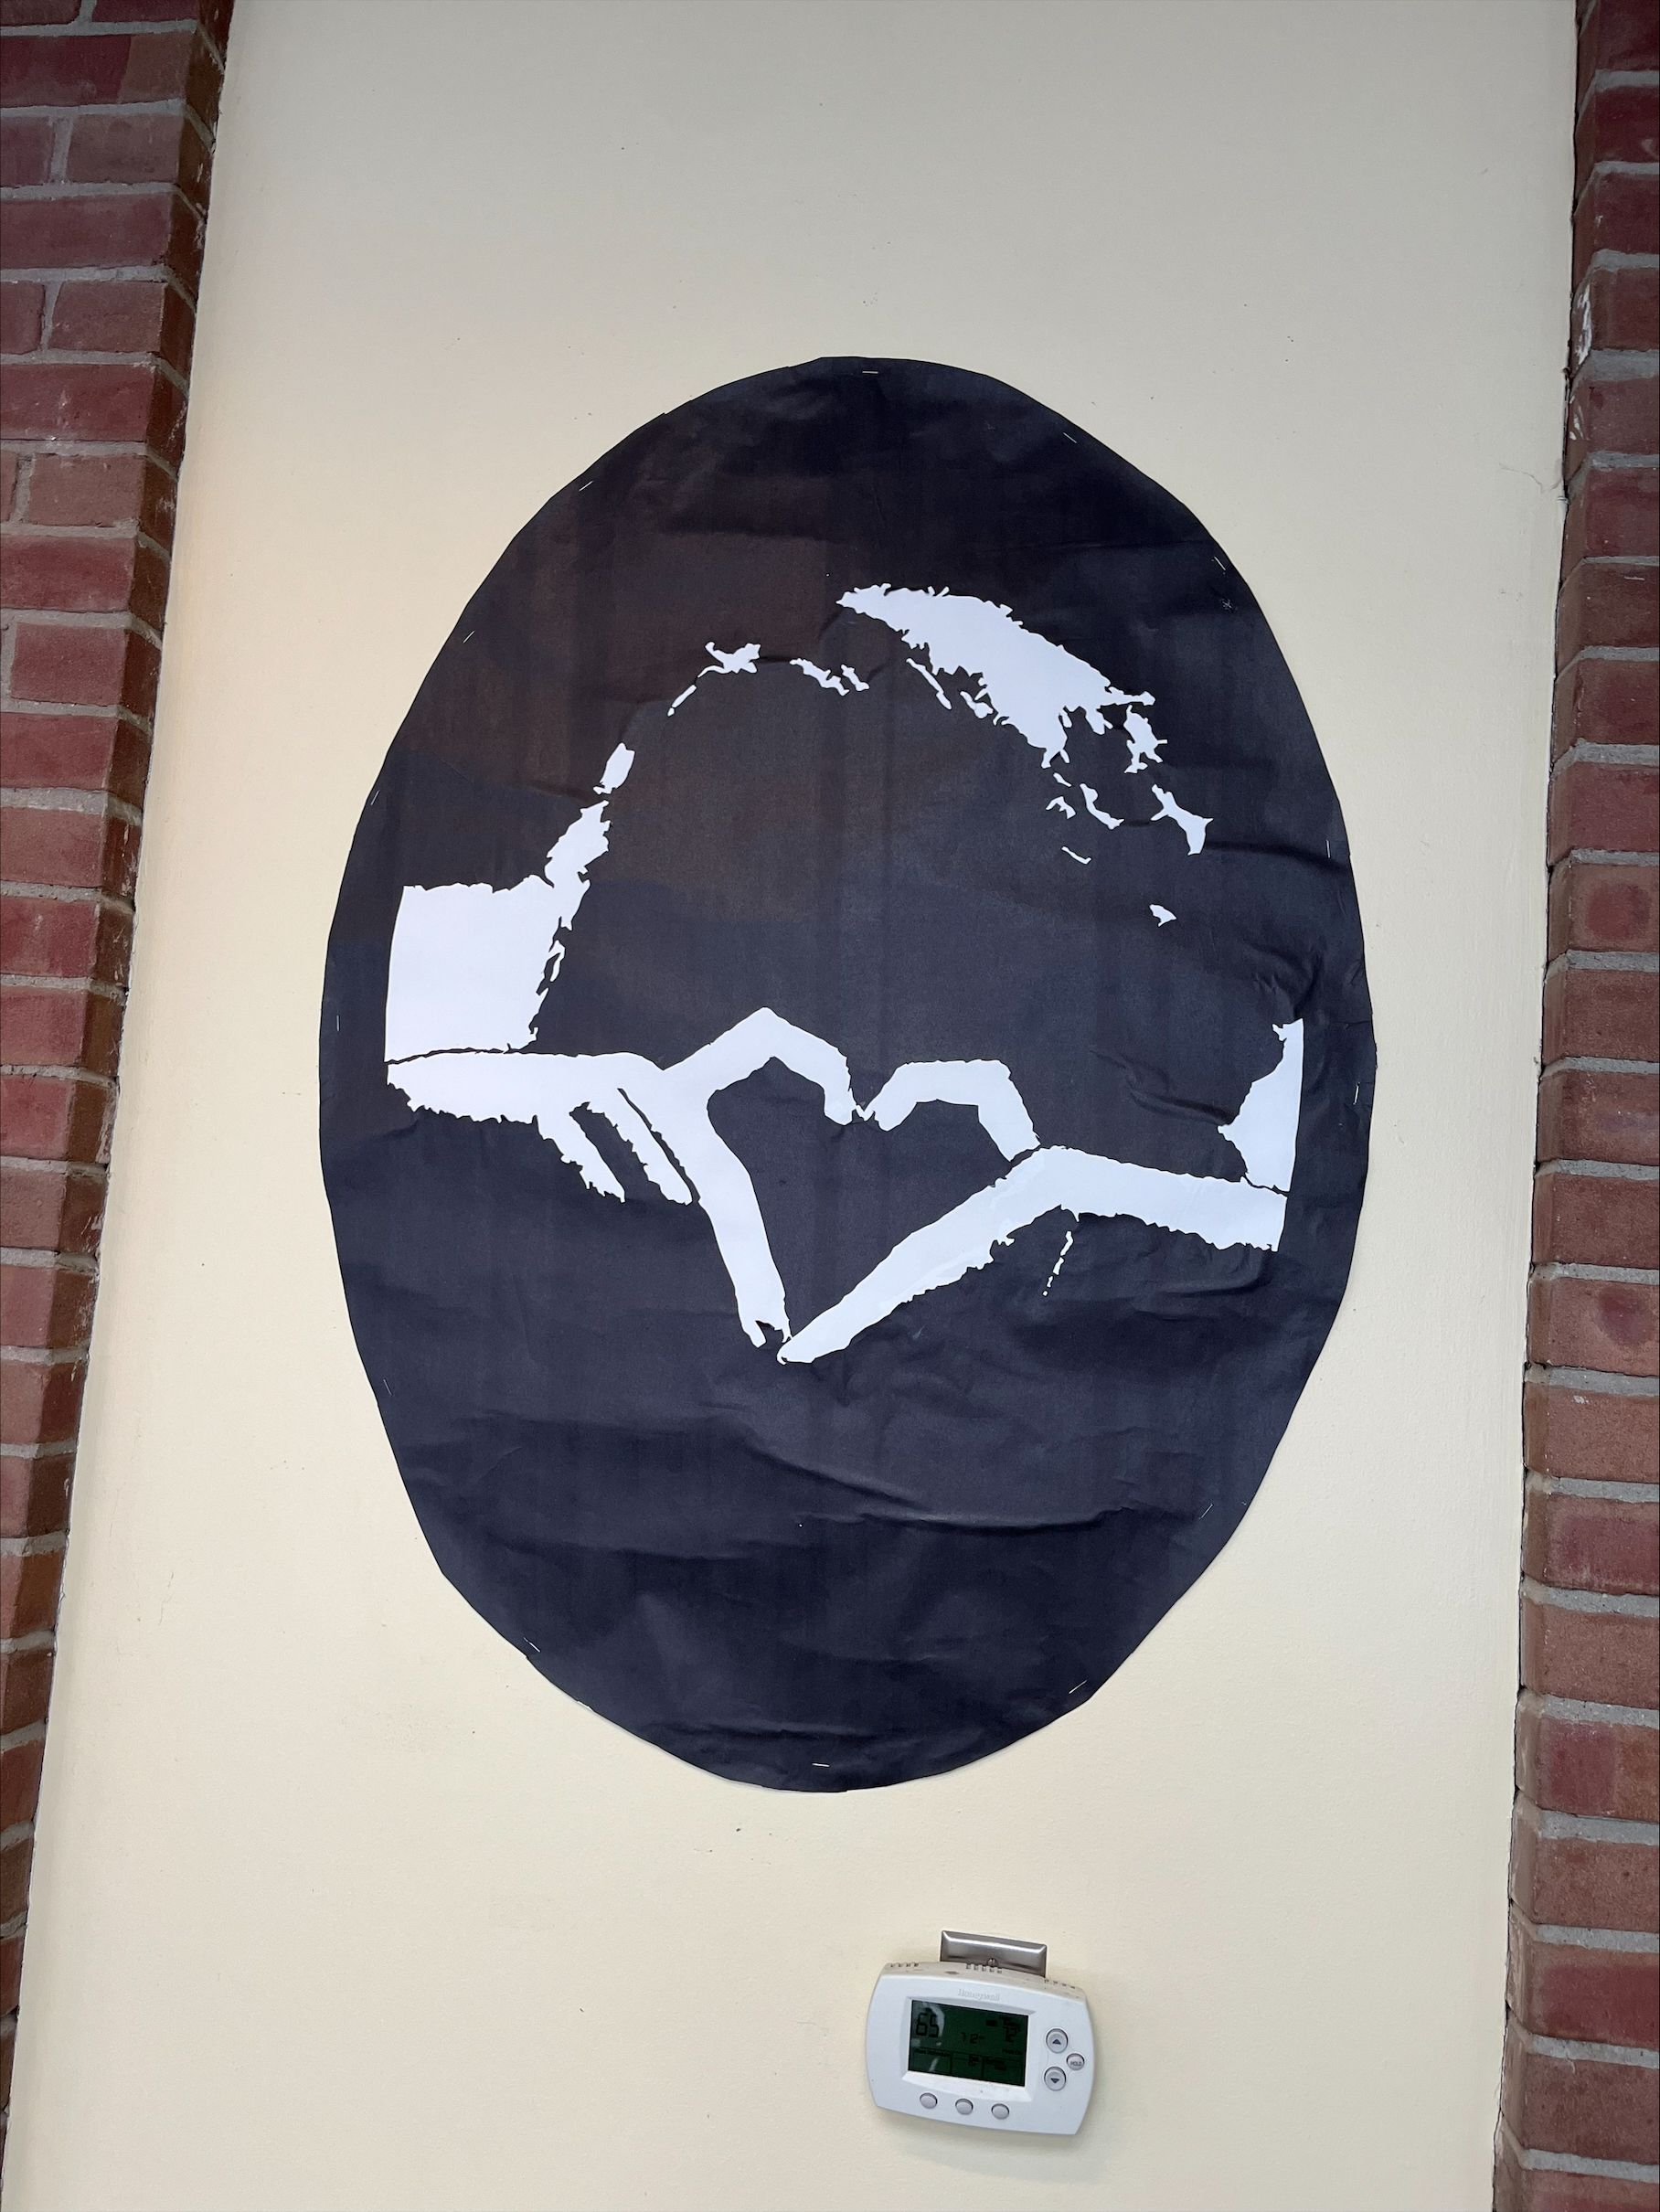 Silhouette art on campus inspired by selfies